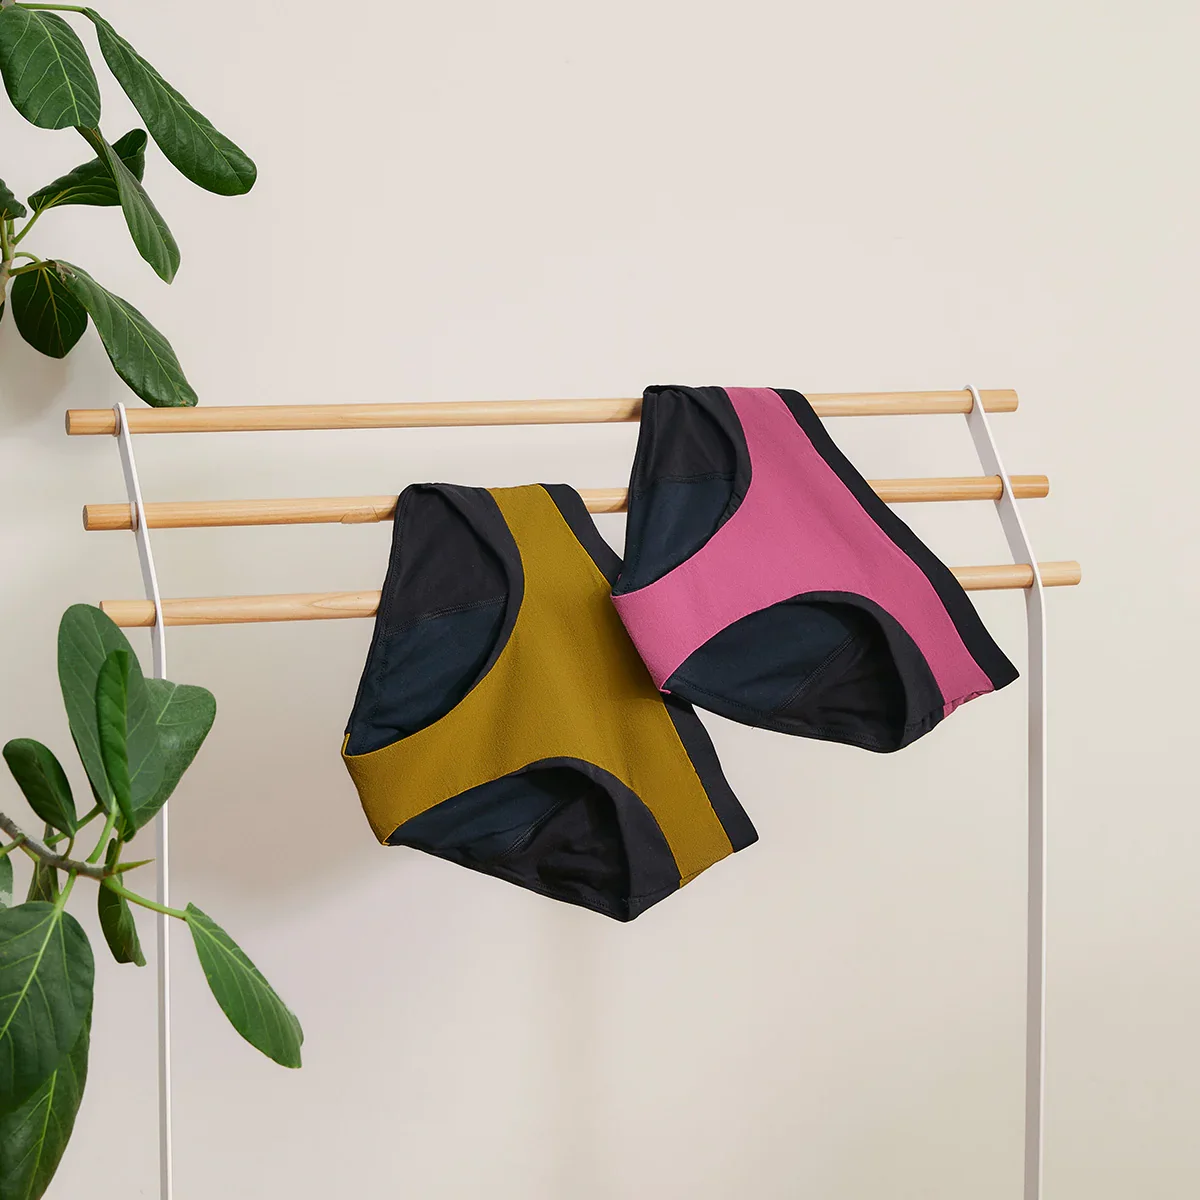 Thinx: Drying Thinx is easier than you think!